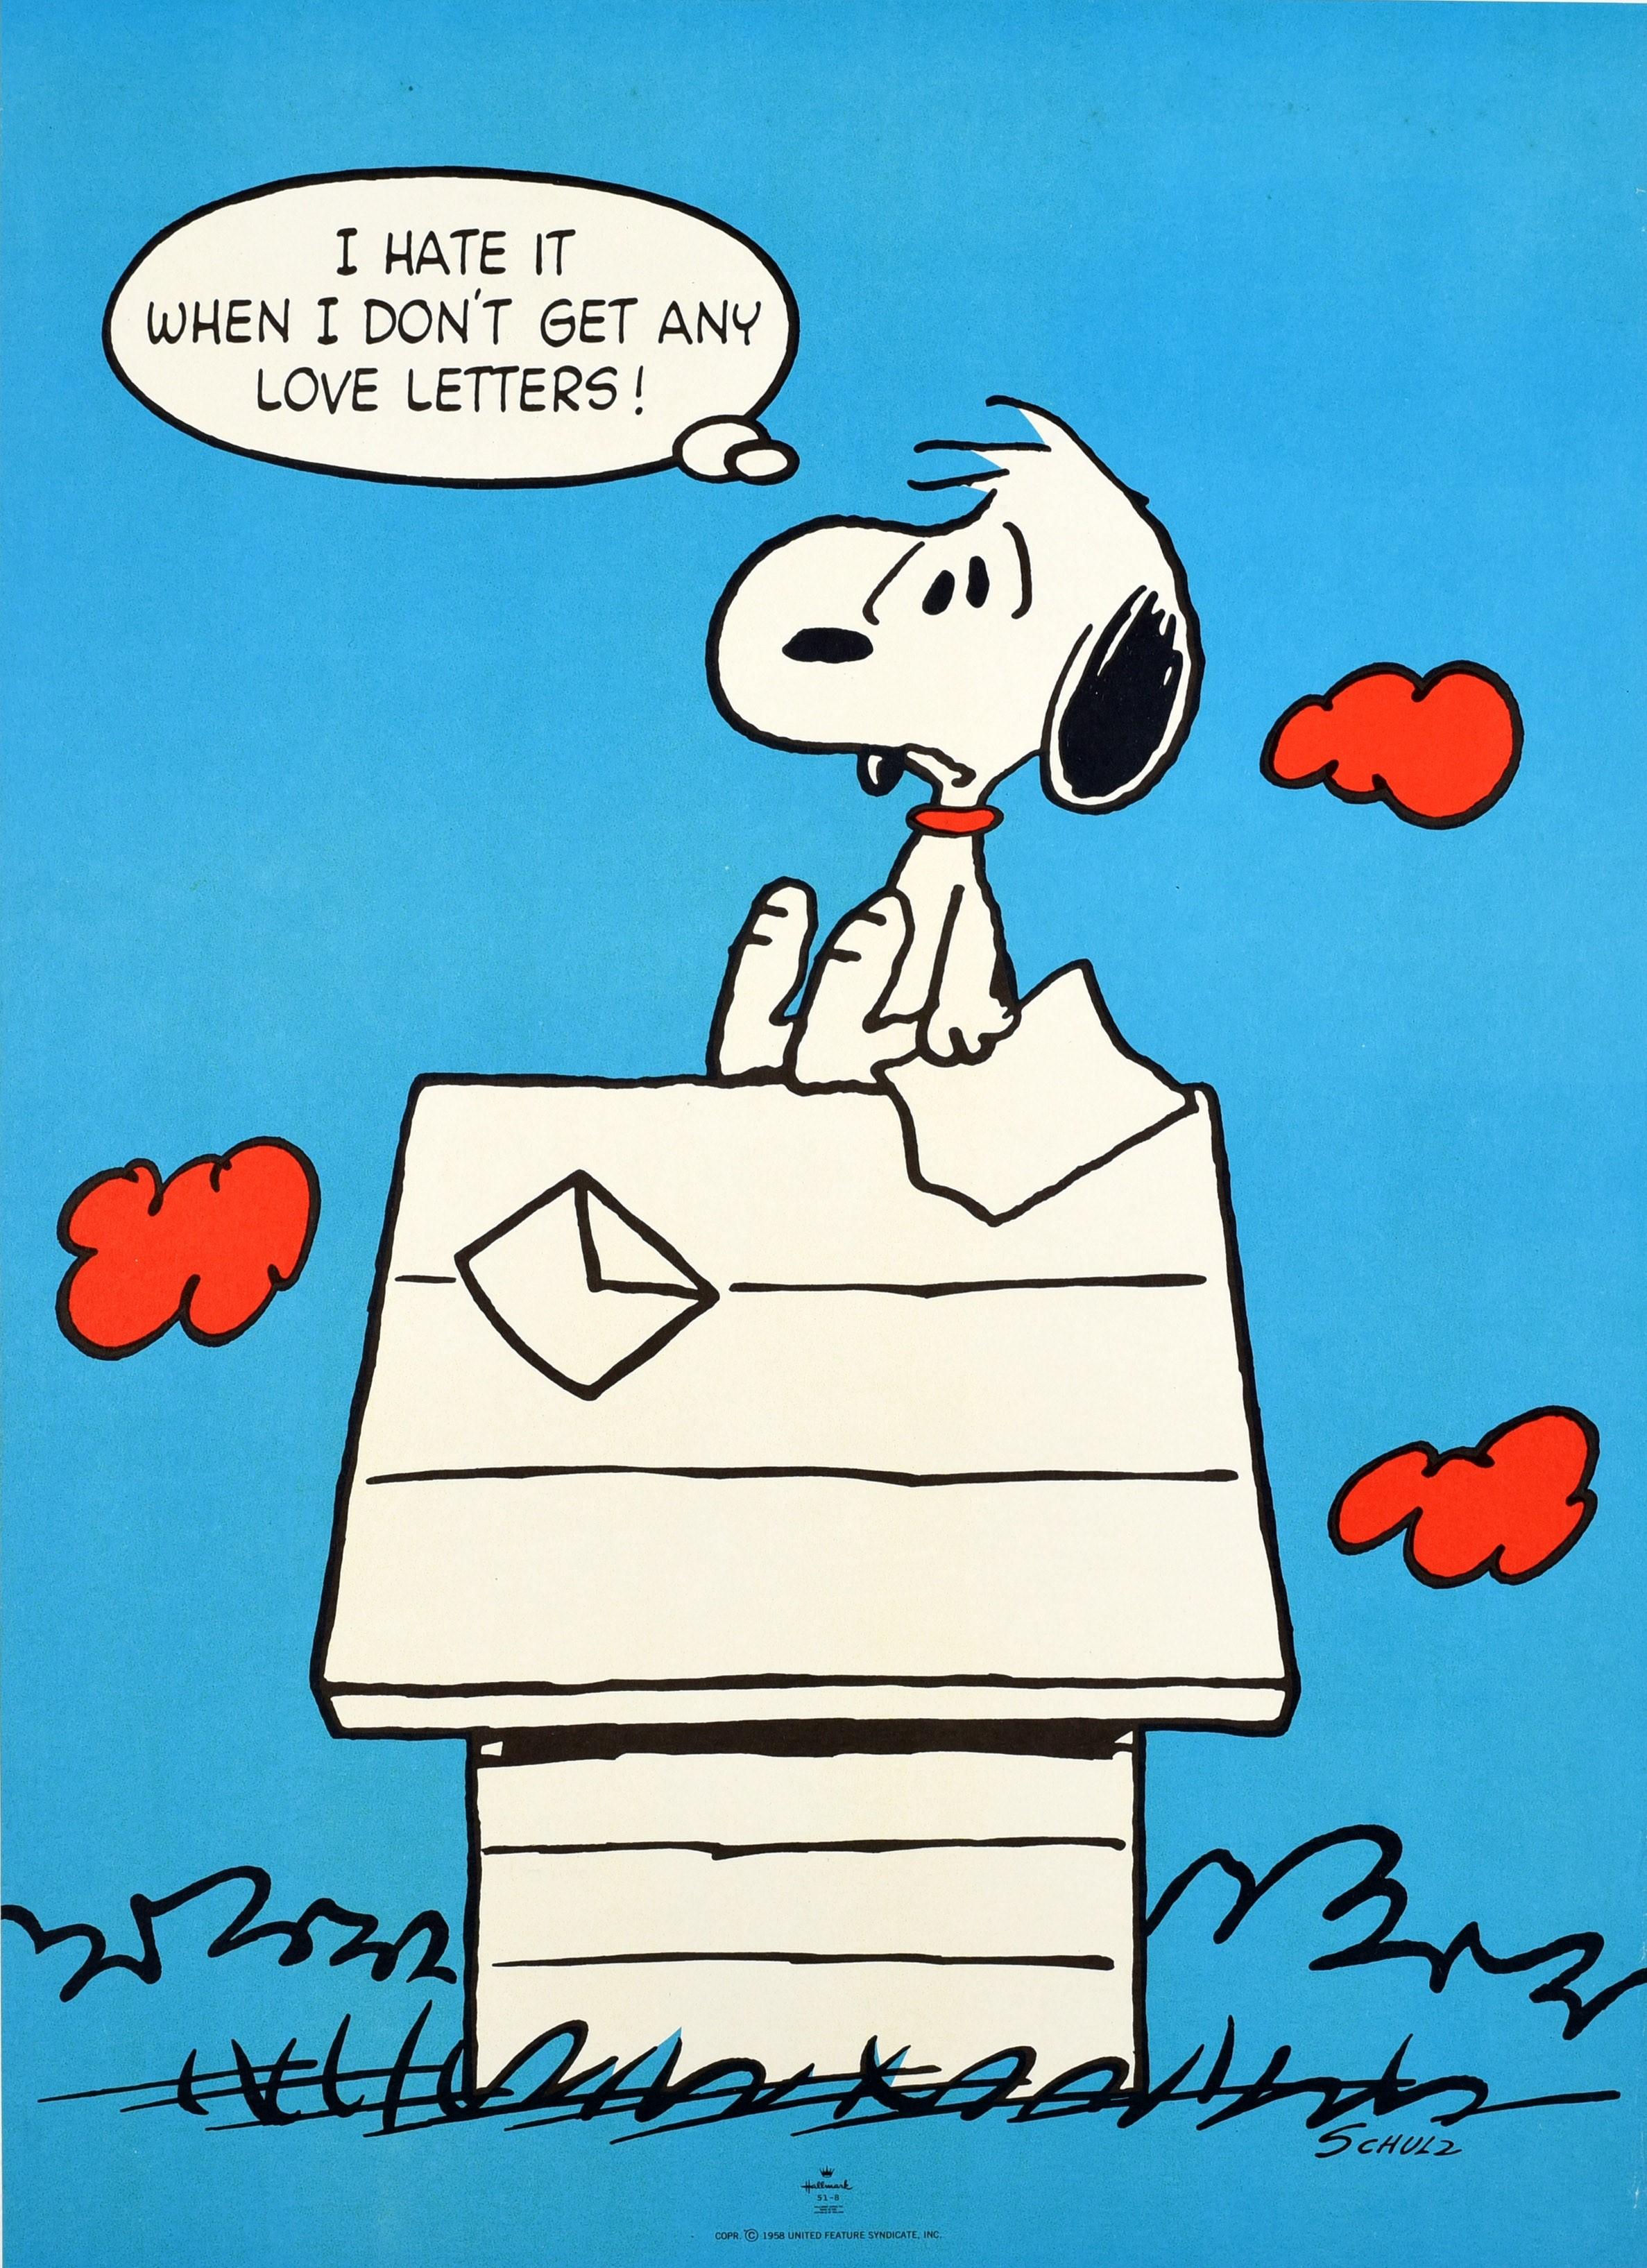 snoopy poster